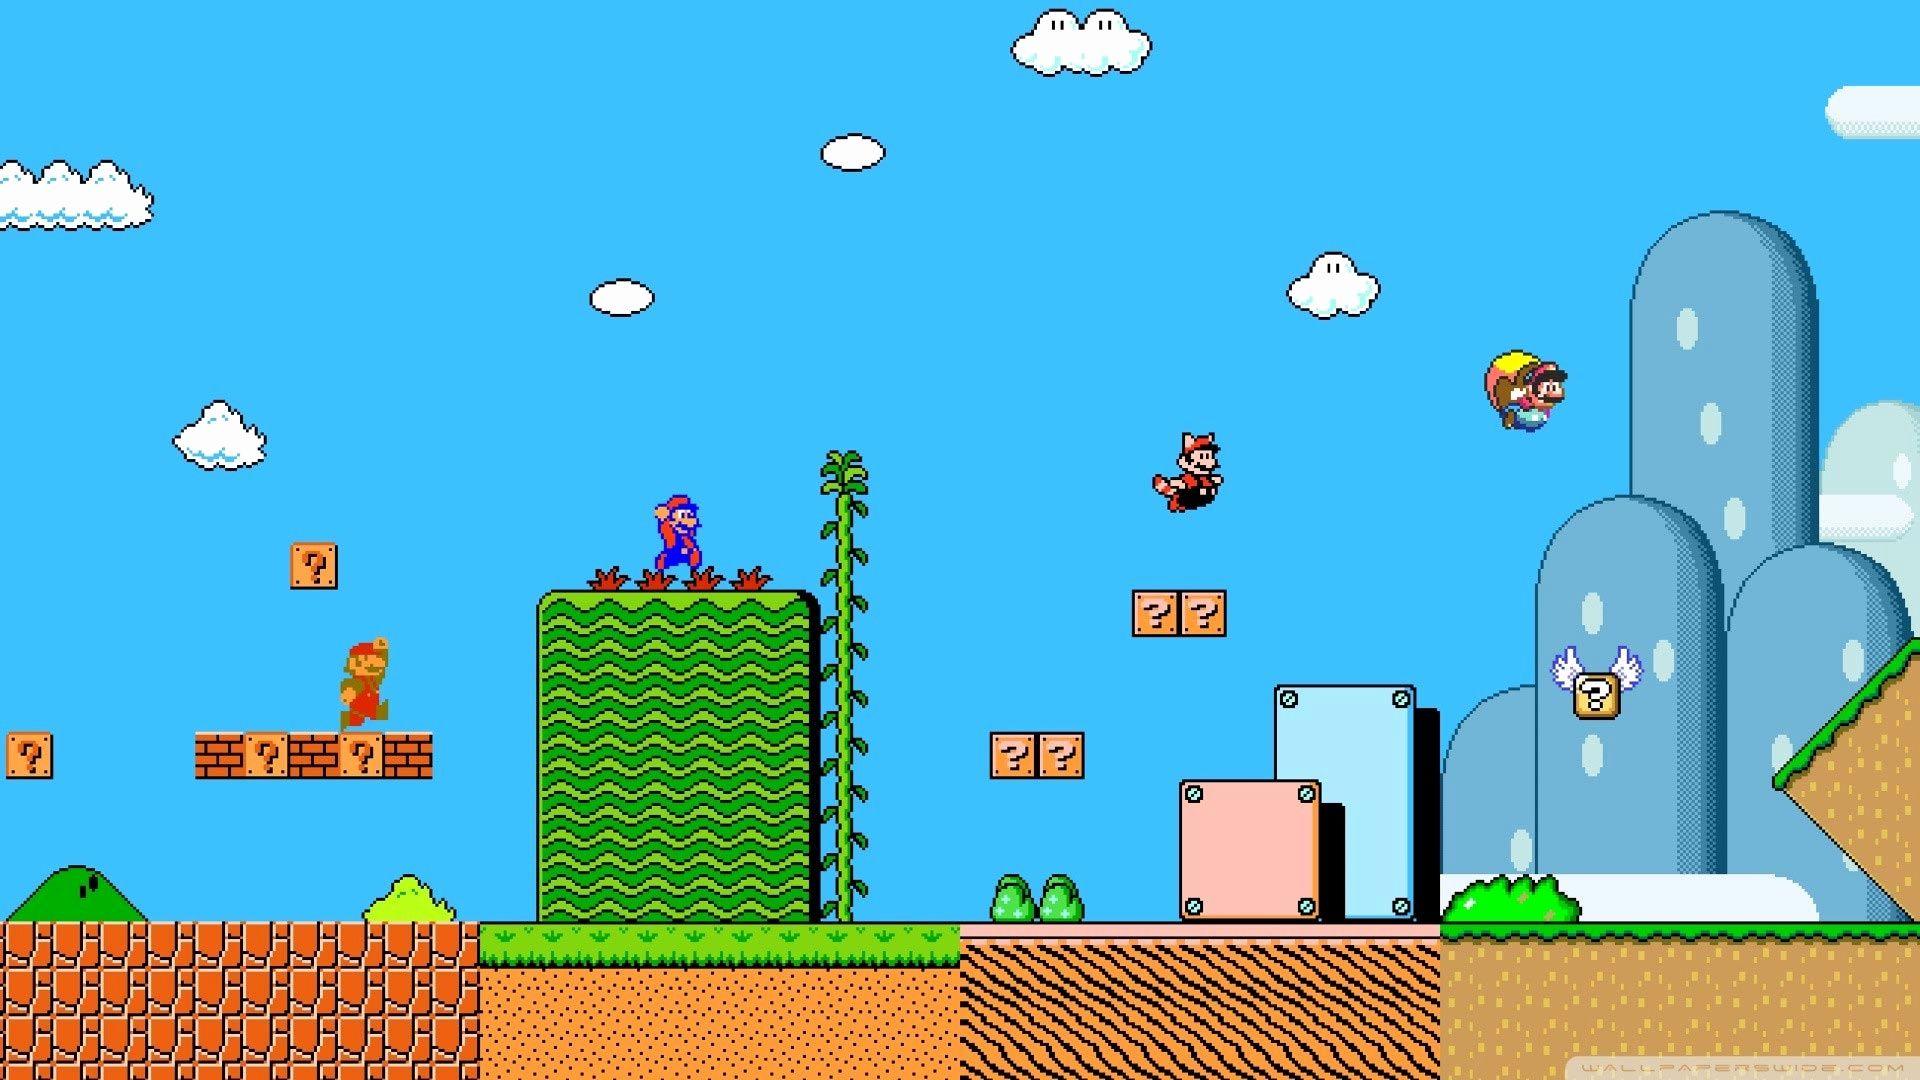 Super Mario World Wallpapers - Top Free Super Mario World Backgrounds